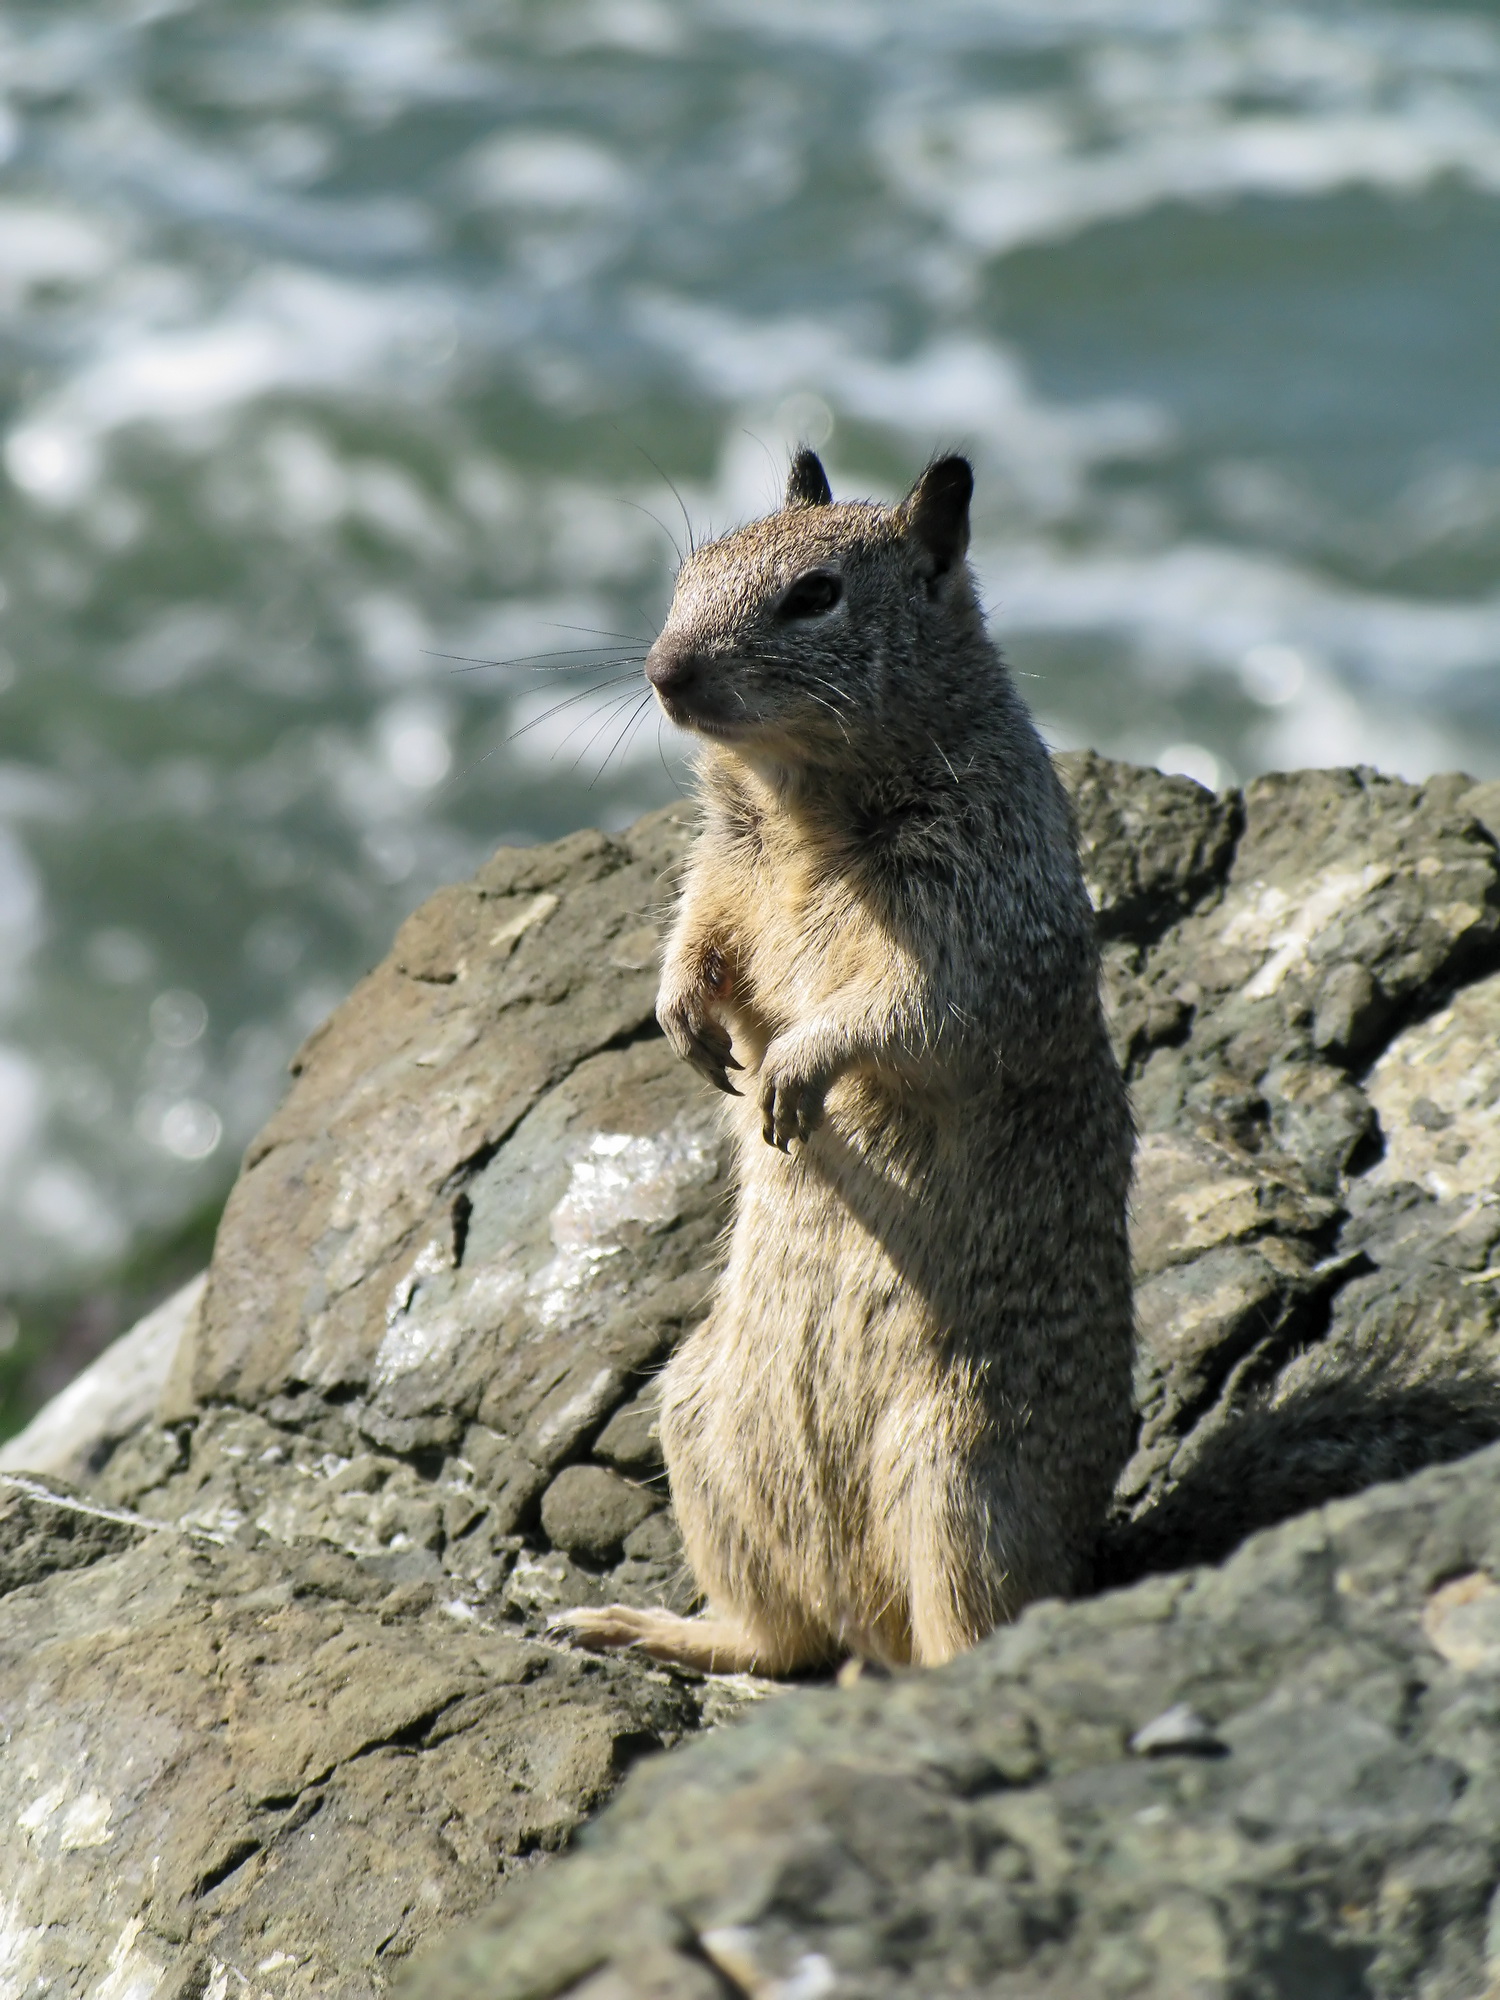 What is a group of ground squirrels called?